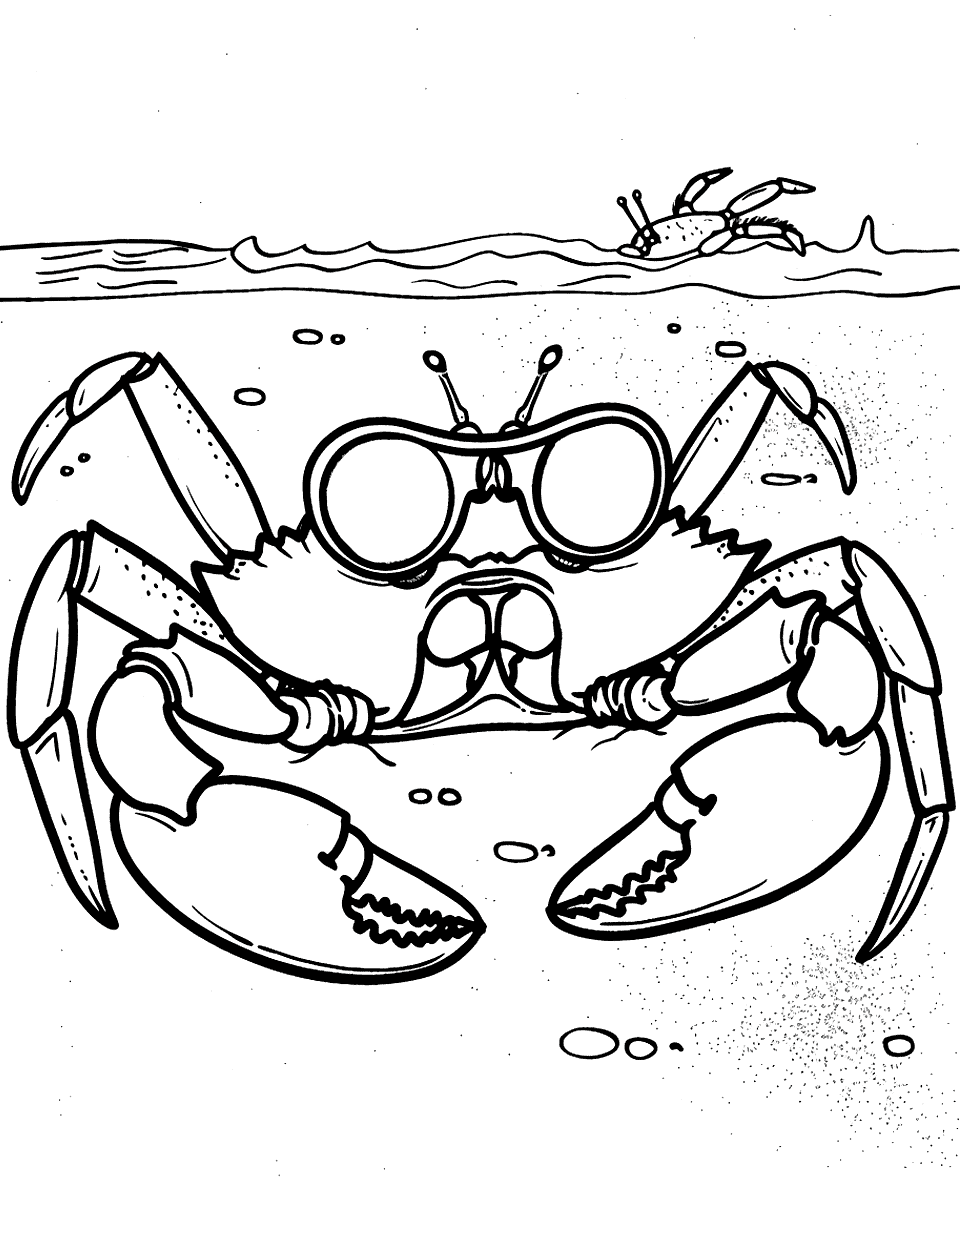 Cool Crab with Sunglasses Coloring Page - A crab sporting a pair of sunglasses, chilling by the beach with a cool pose.